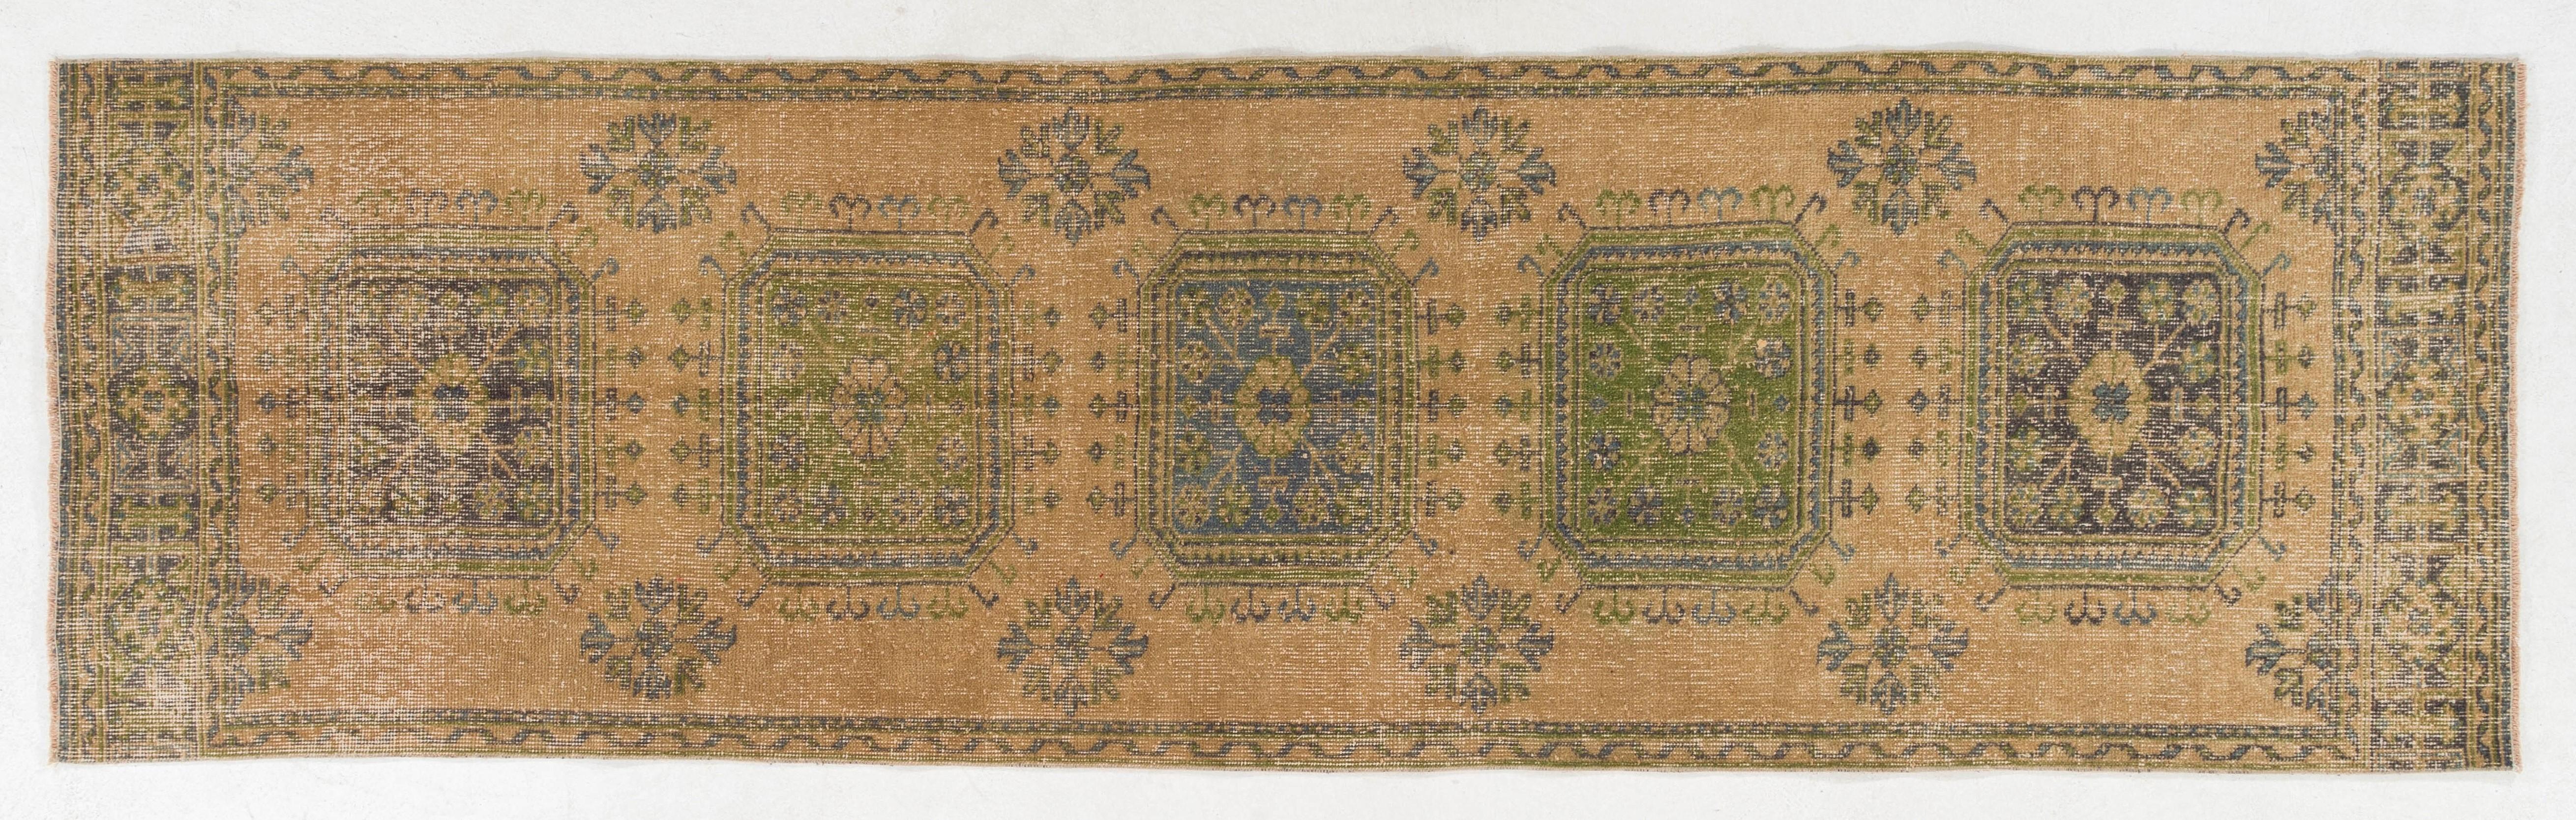 20th Century 3.3x11.5 Ft Authentic Vintage Oushak Runner Rug. Hand-Knotted Carpet for Hallway For Sale